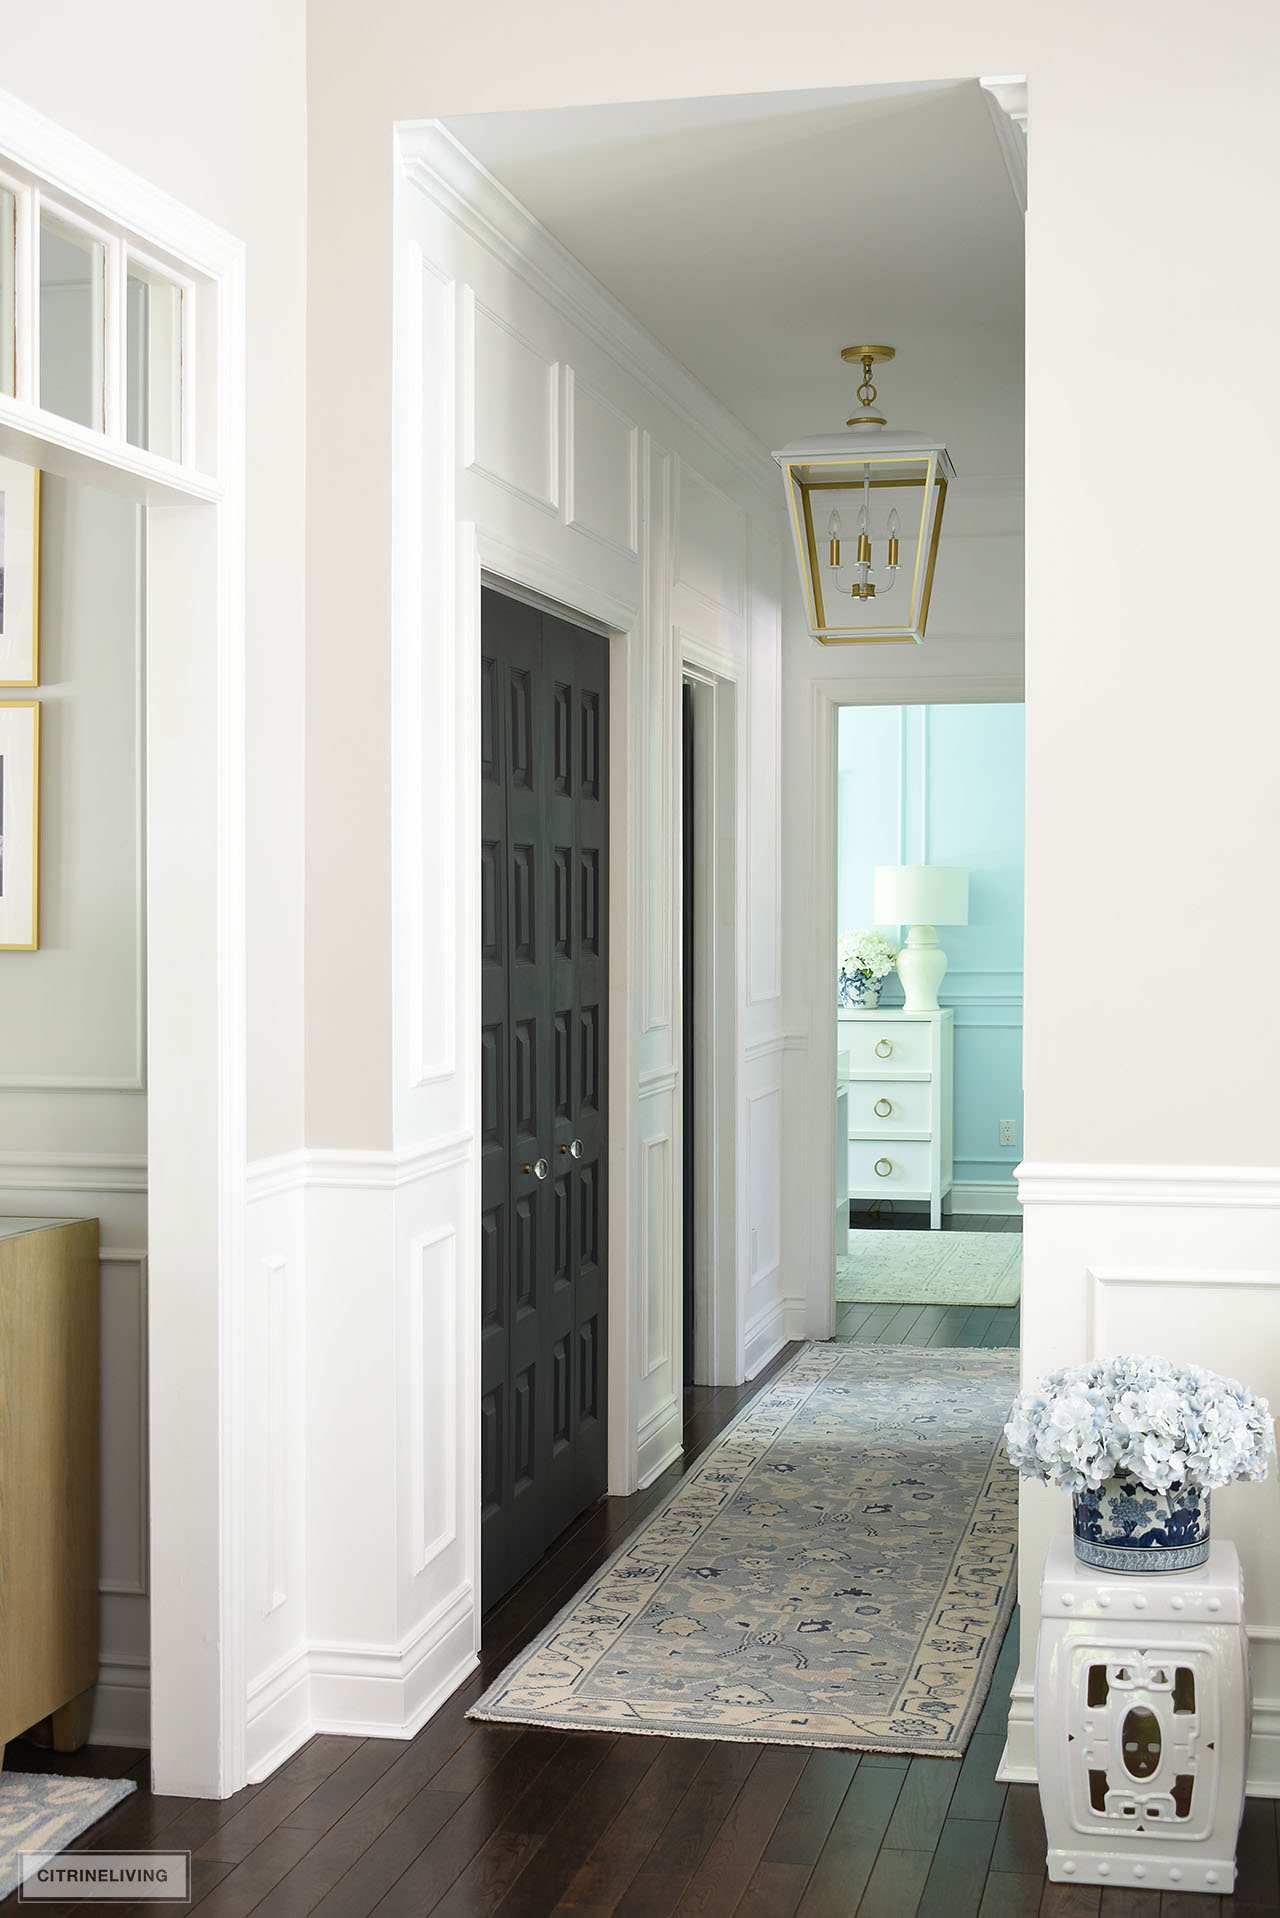 A beautiful hallway makeover featuring white painted walls with moldings, a large white and gold lantern pendant light and a beautiful oushak runner.